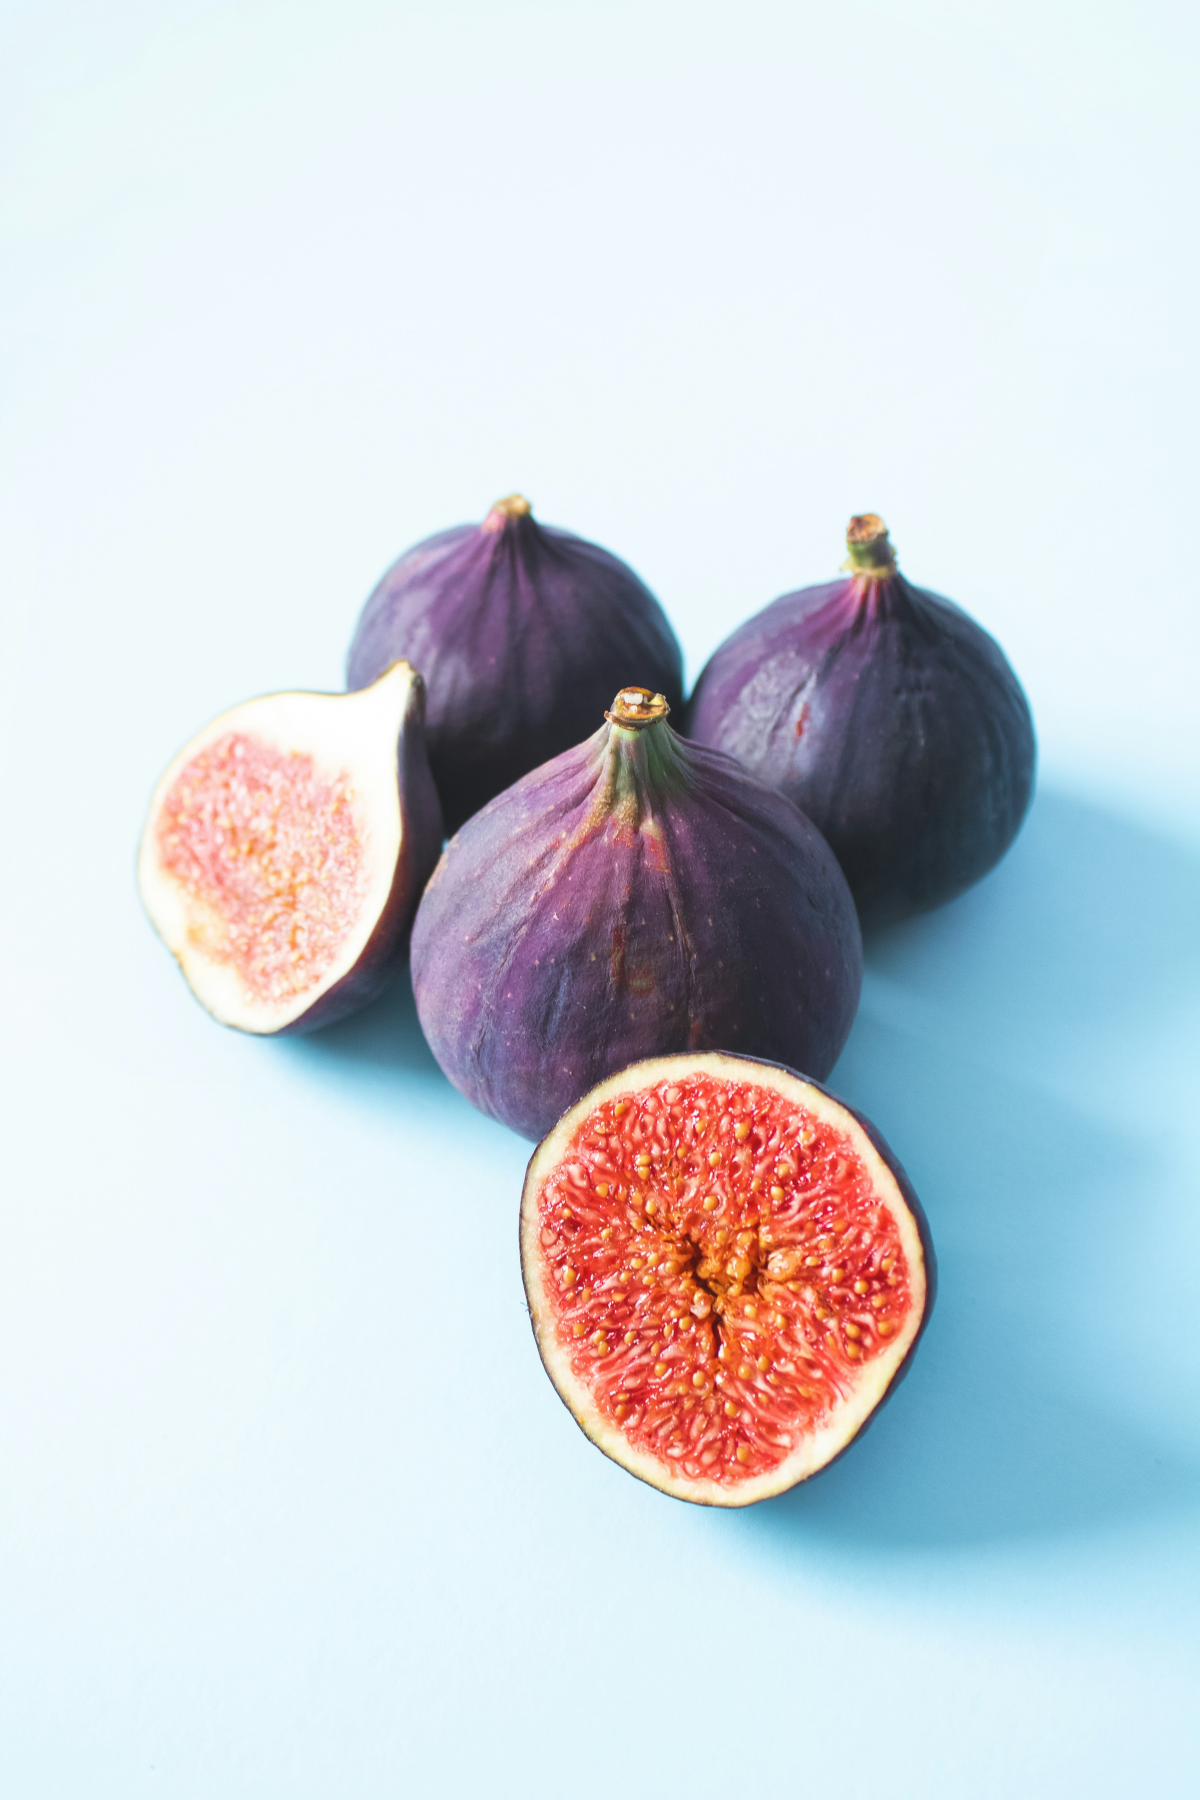 fruits that are in season in winter figs